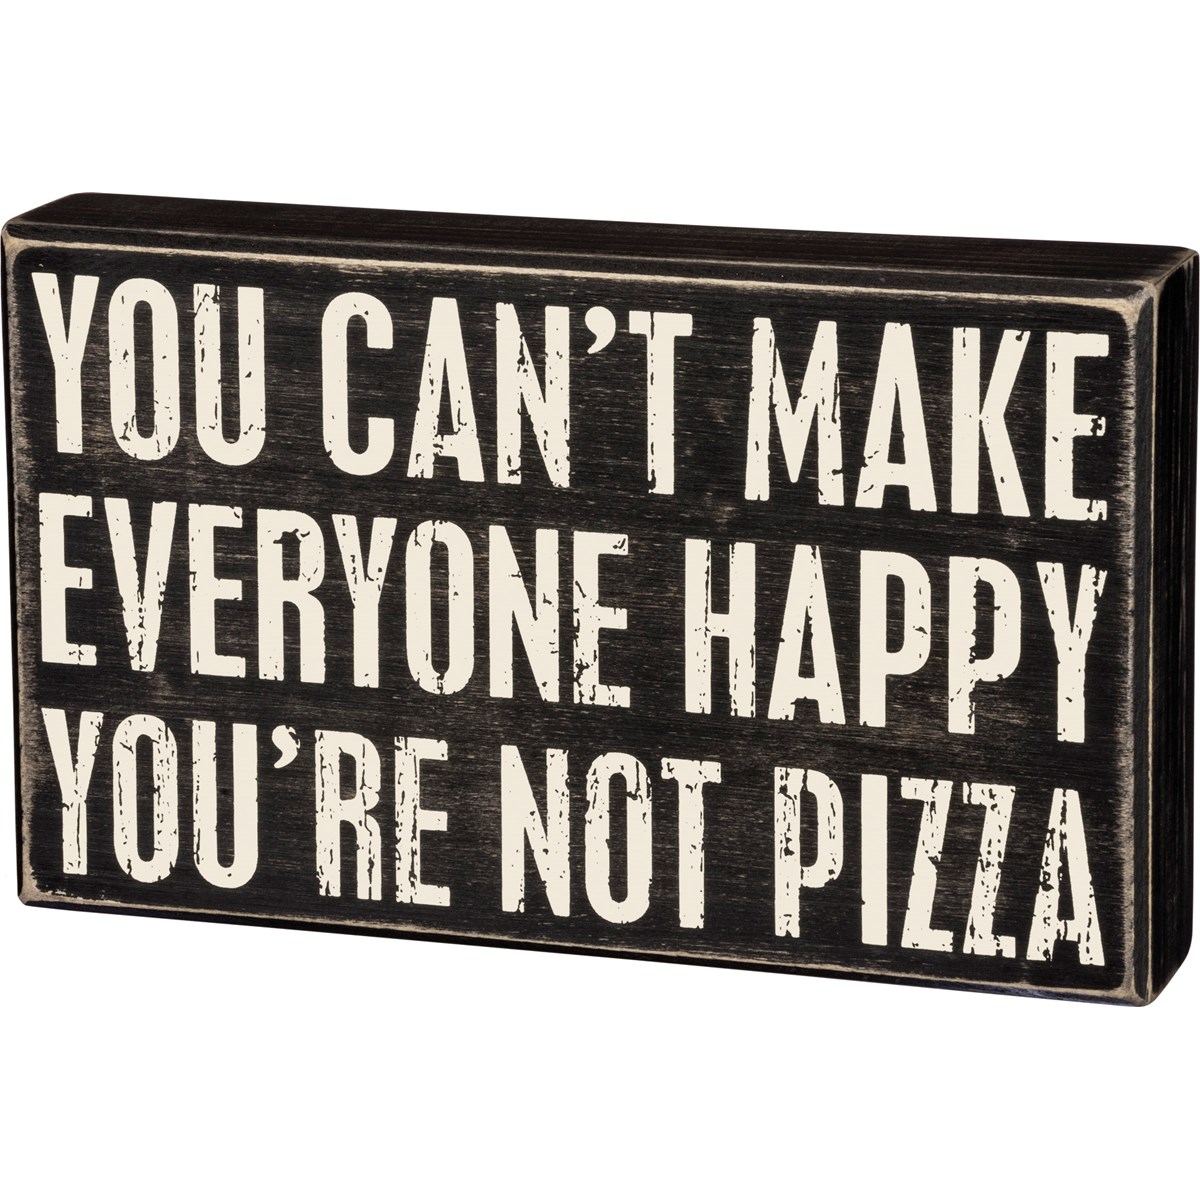 Not Pizza Box Sign - Wood